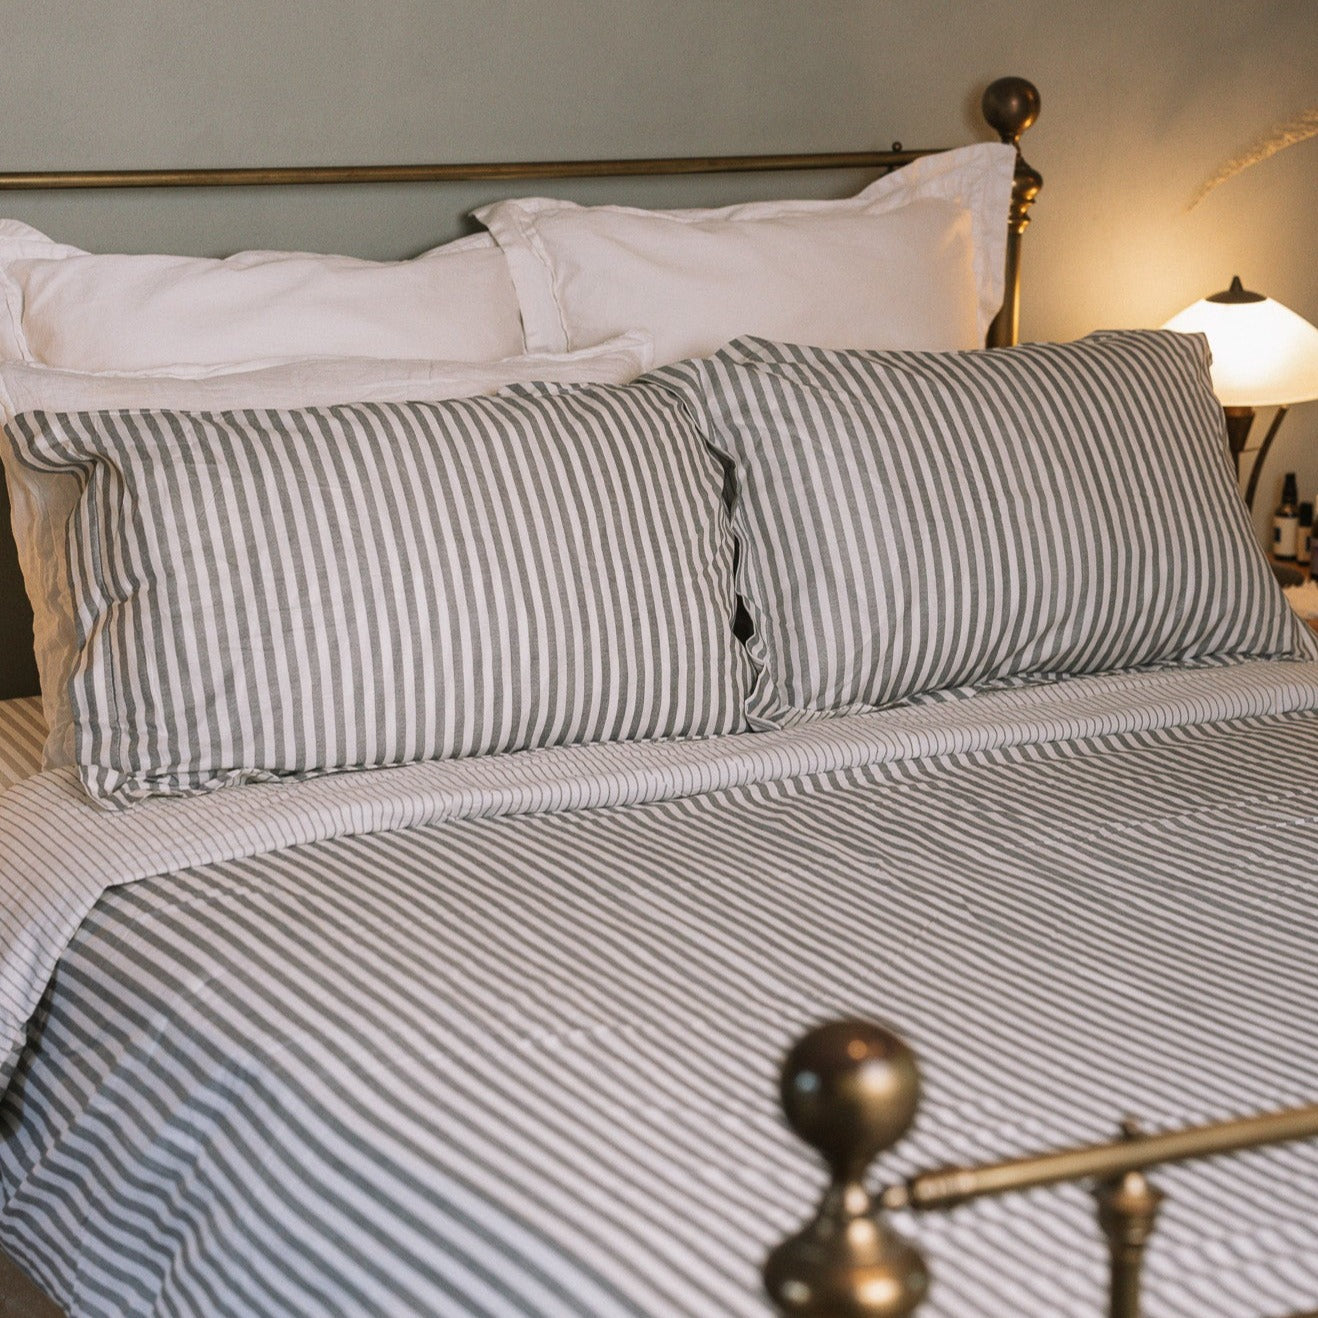 Grey Striped Bedding on a brass bed.